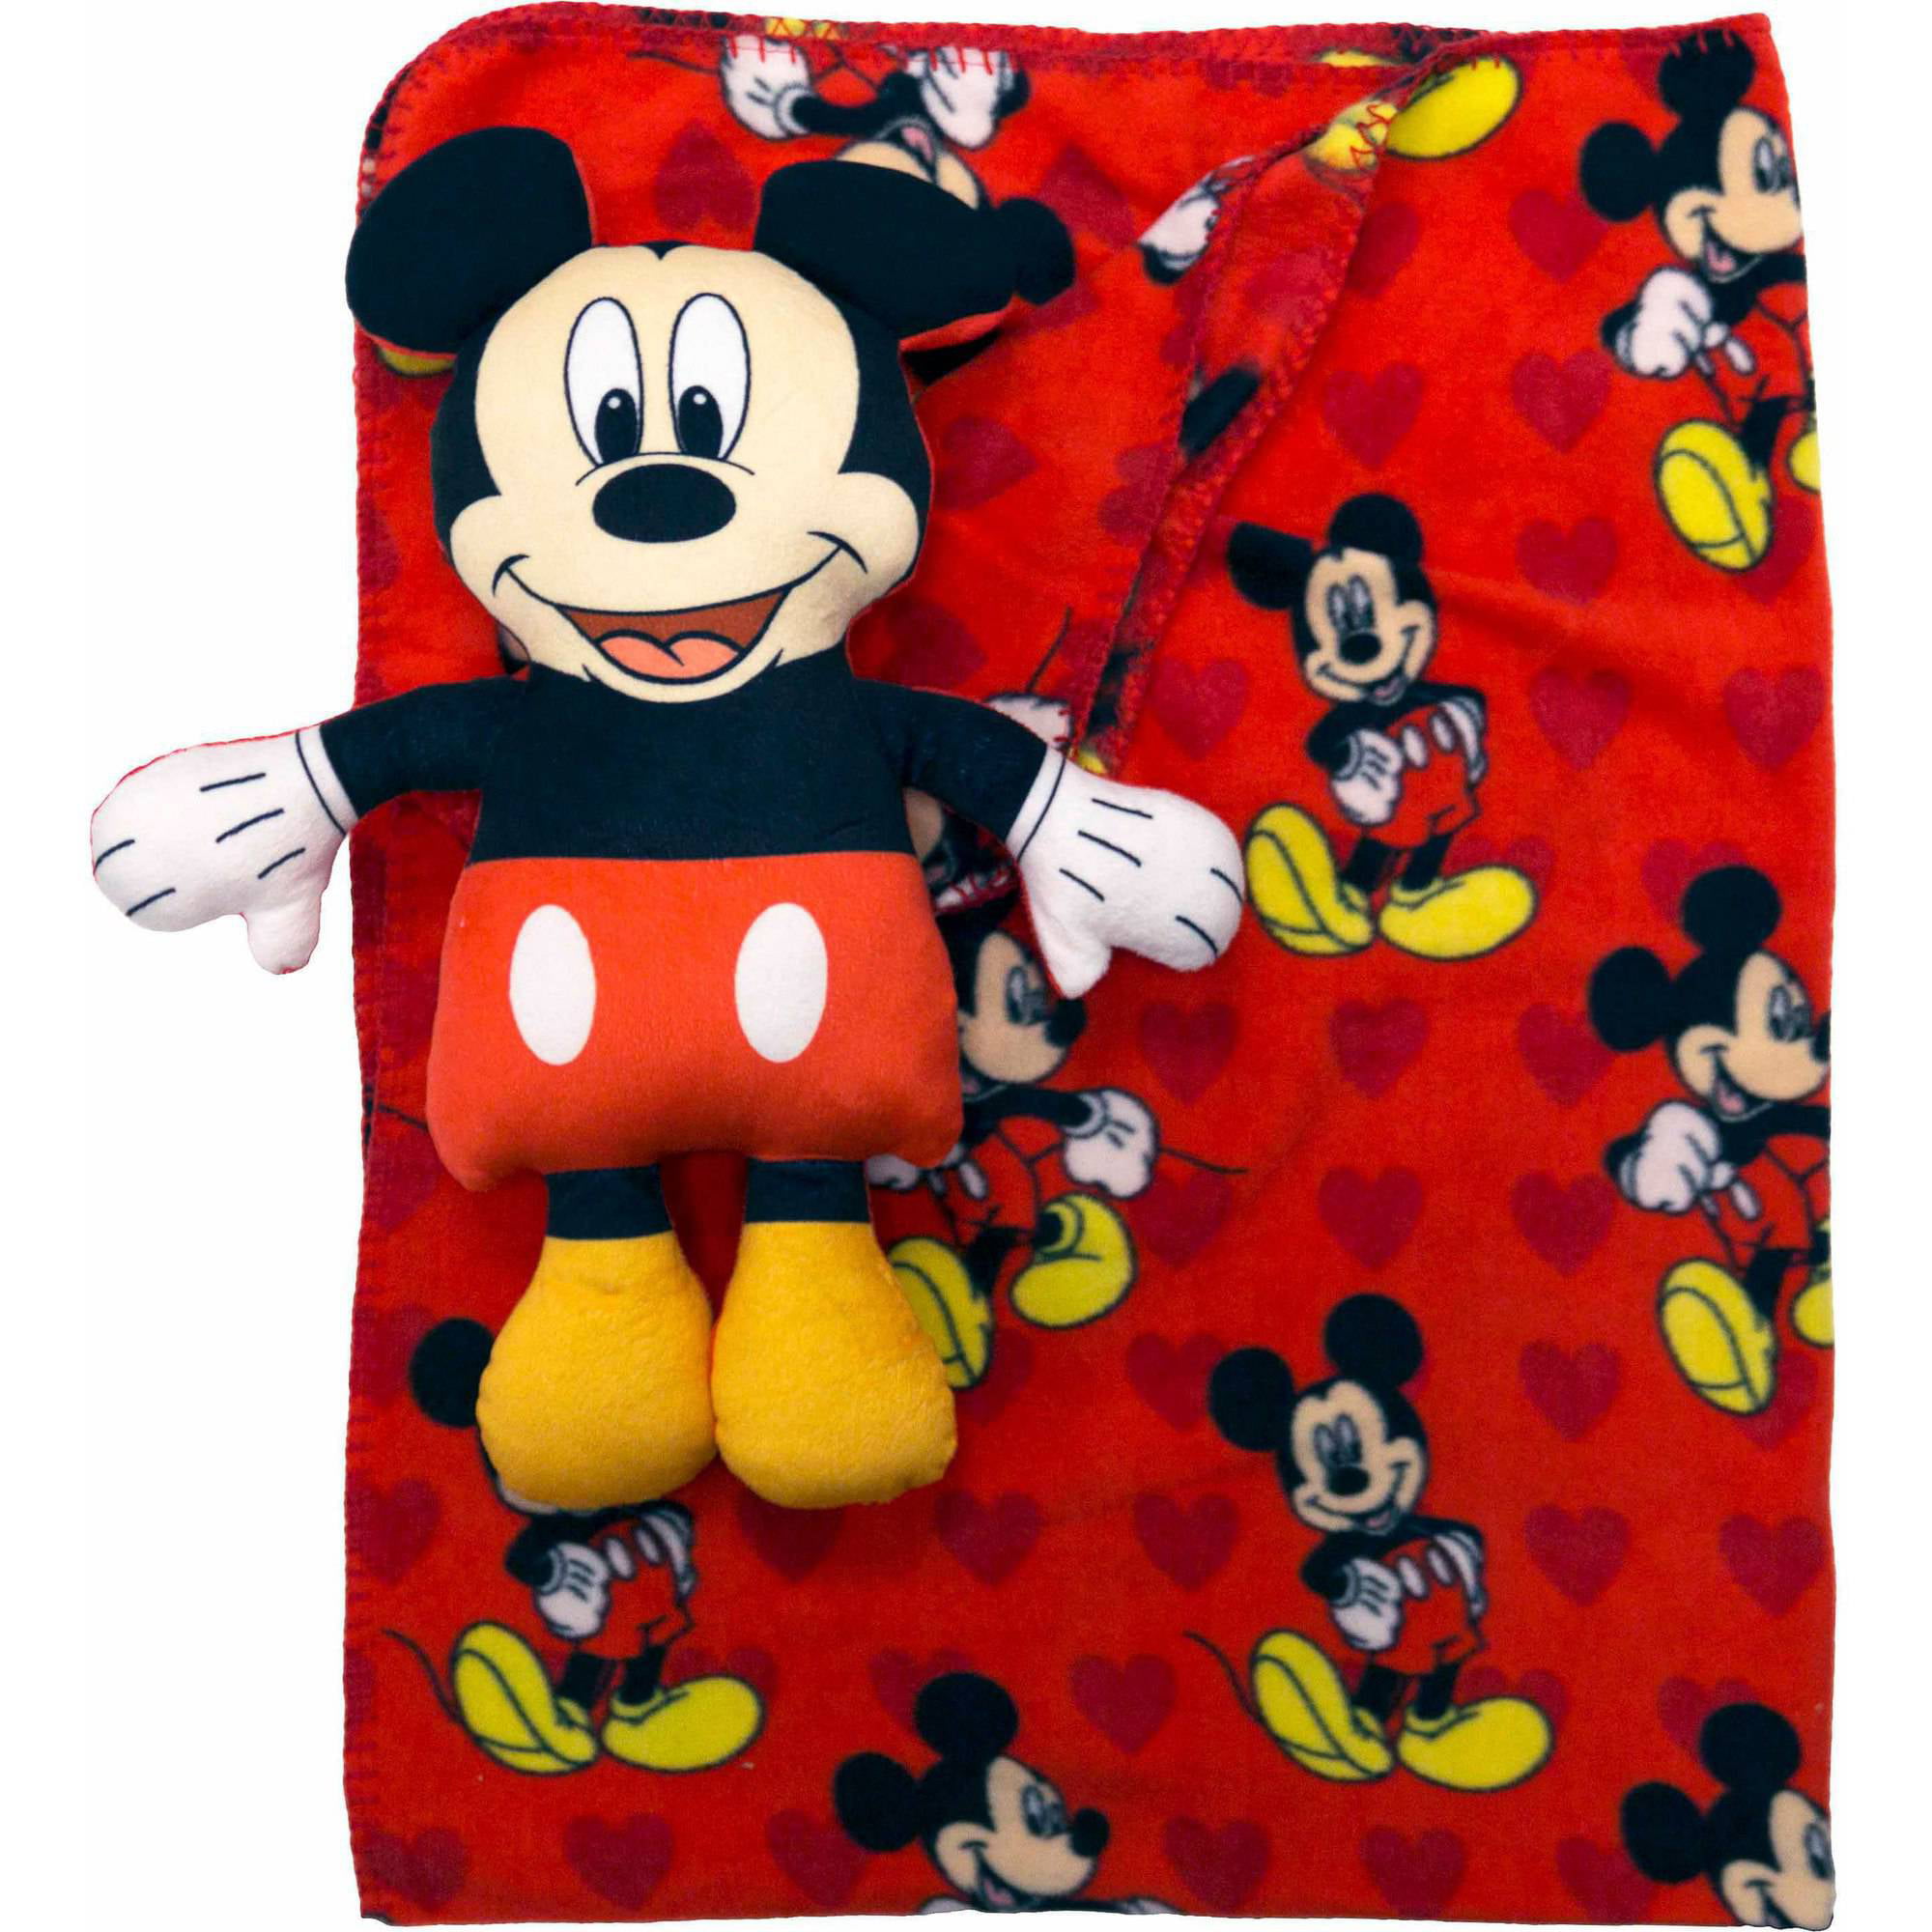 Disney Mickey Mouse Character Pillow 